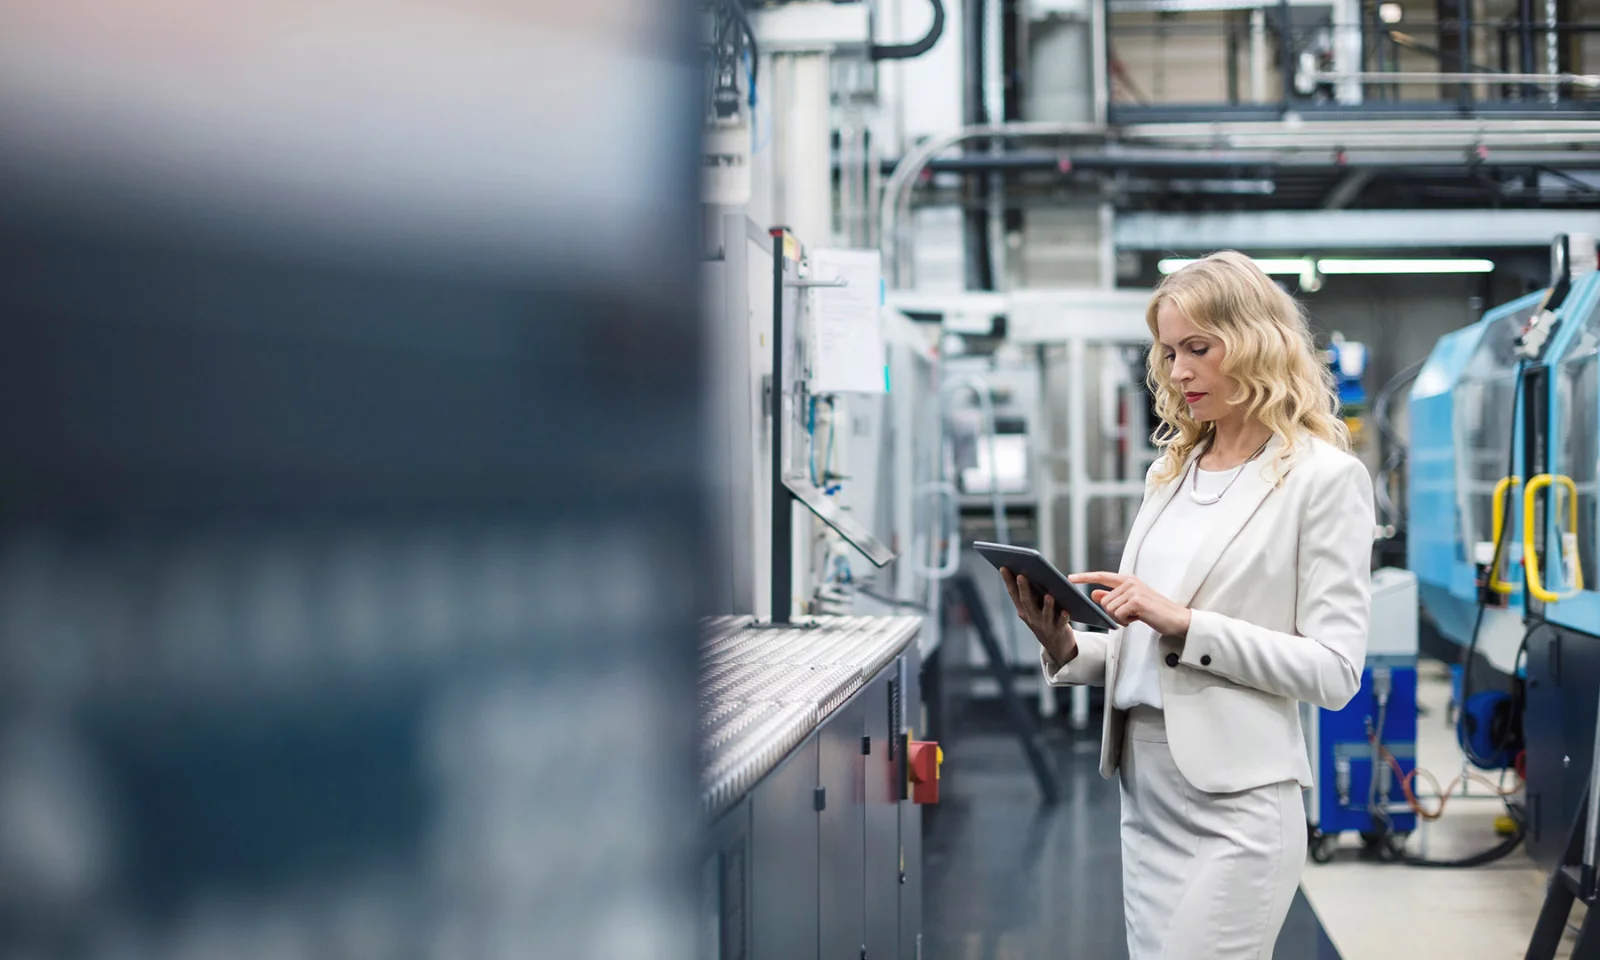 Businesswoman leveraging technology in a manufacturing facility, highlighting the integration of digital tools in industrial management and operations.